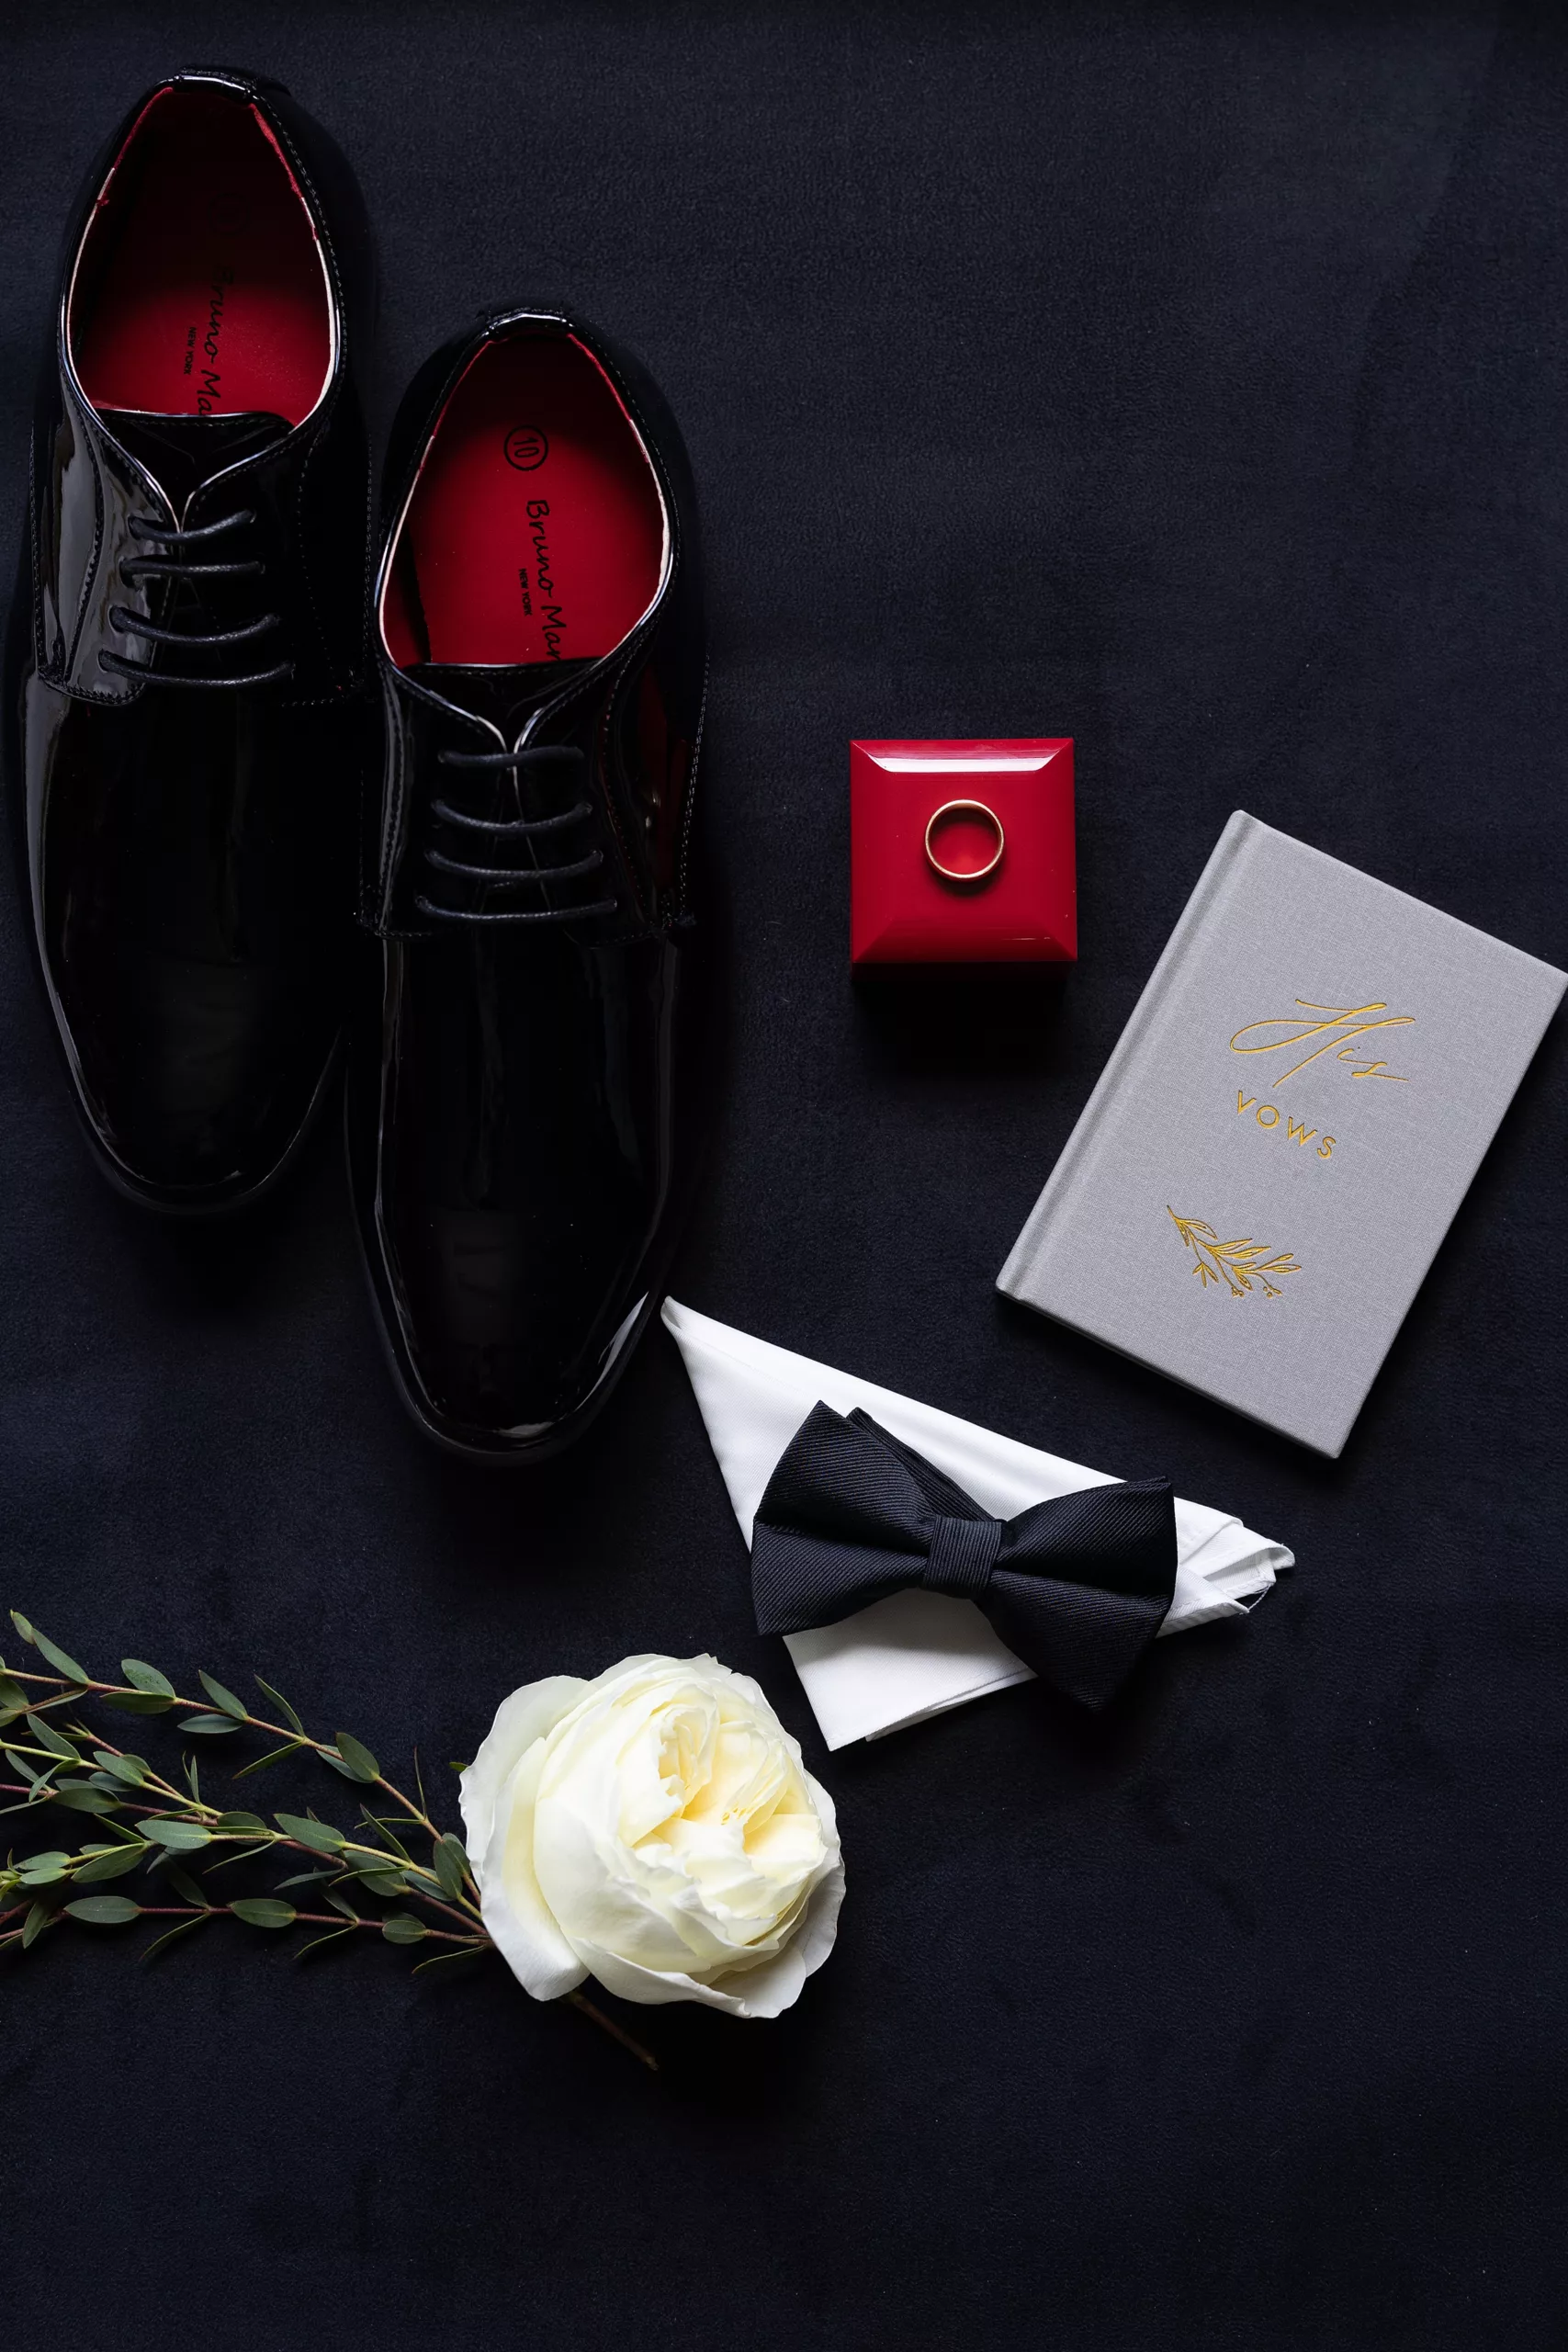 Details of a groom's shoes and wedding details